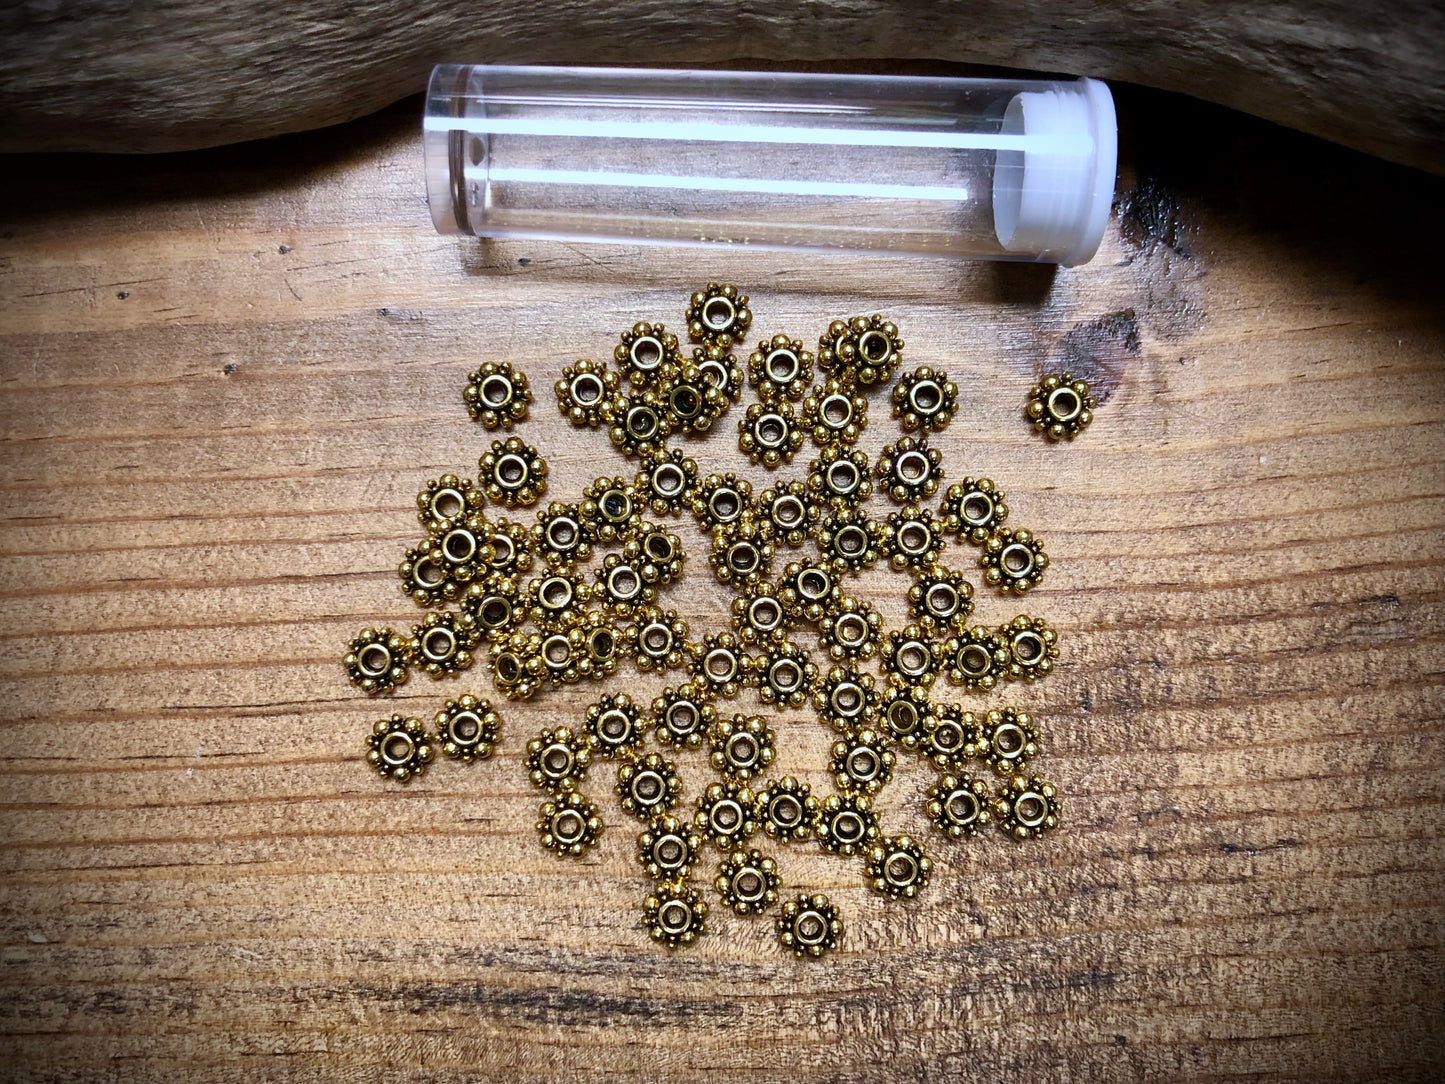 Gold Tone Pewter Spacers Set - 2mm x 6mm Daisies